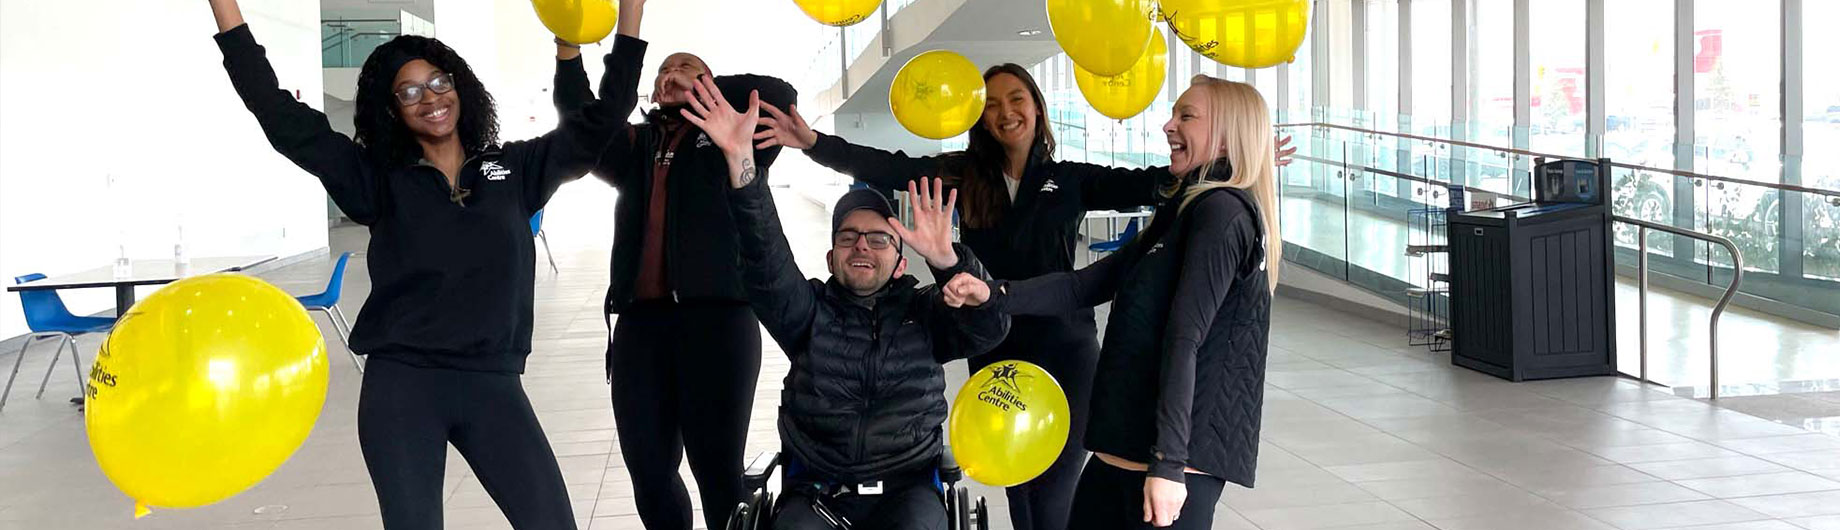 Abilities Centre Staff celebrate in the Atrium with their hands in the air while balloons float in the air 